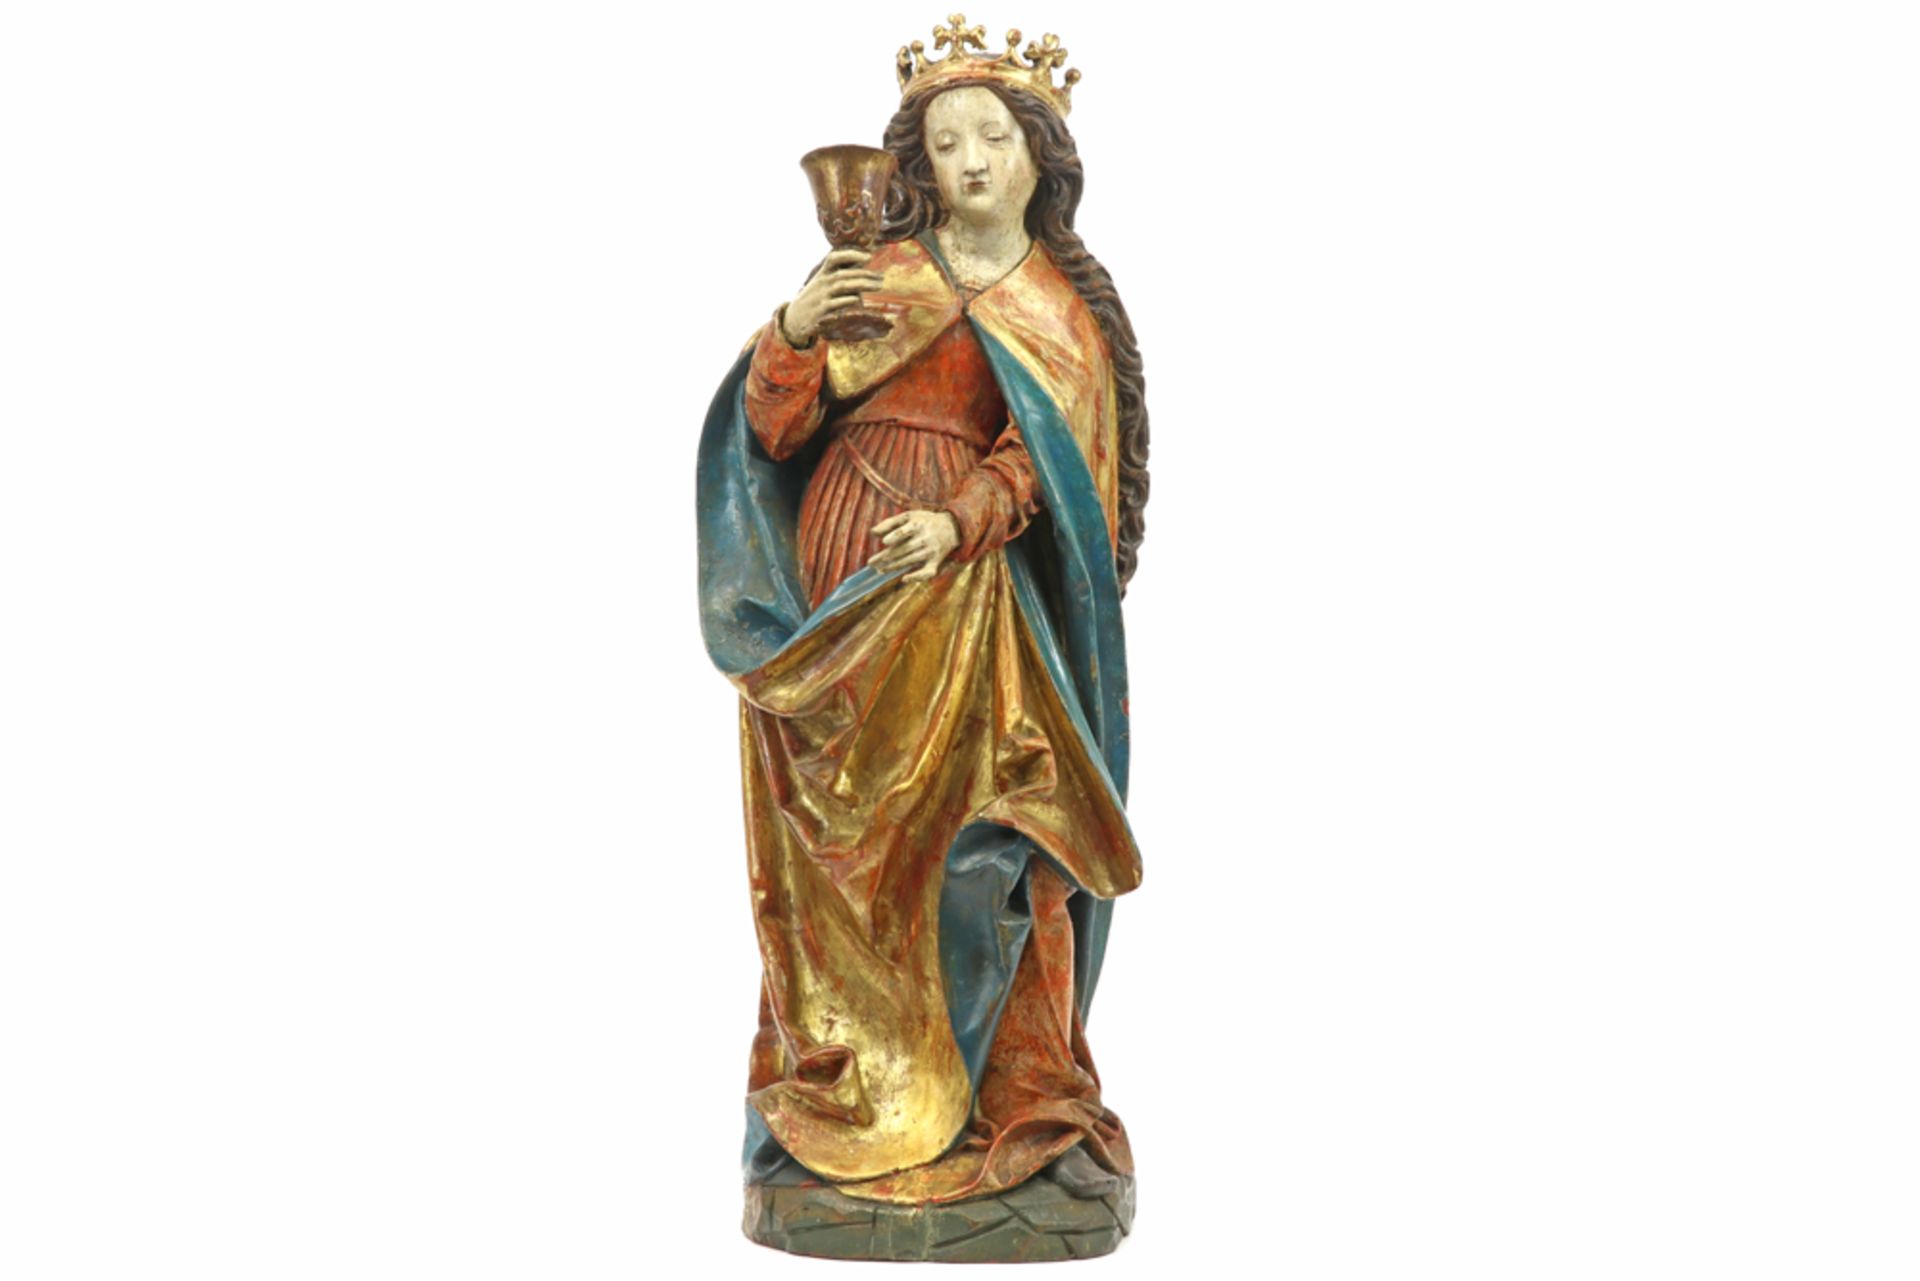 15th Cent. Flemish gothic style sculpture in wood with well preserved polychromy representing "